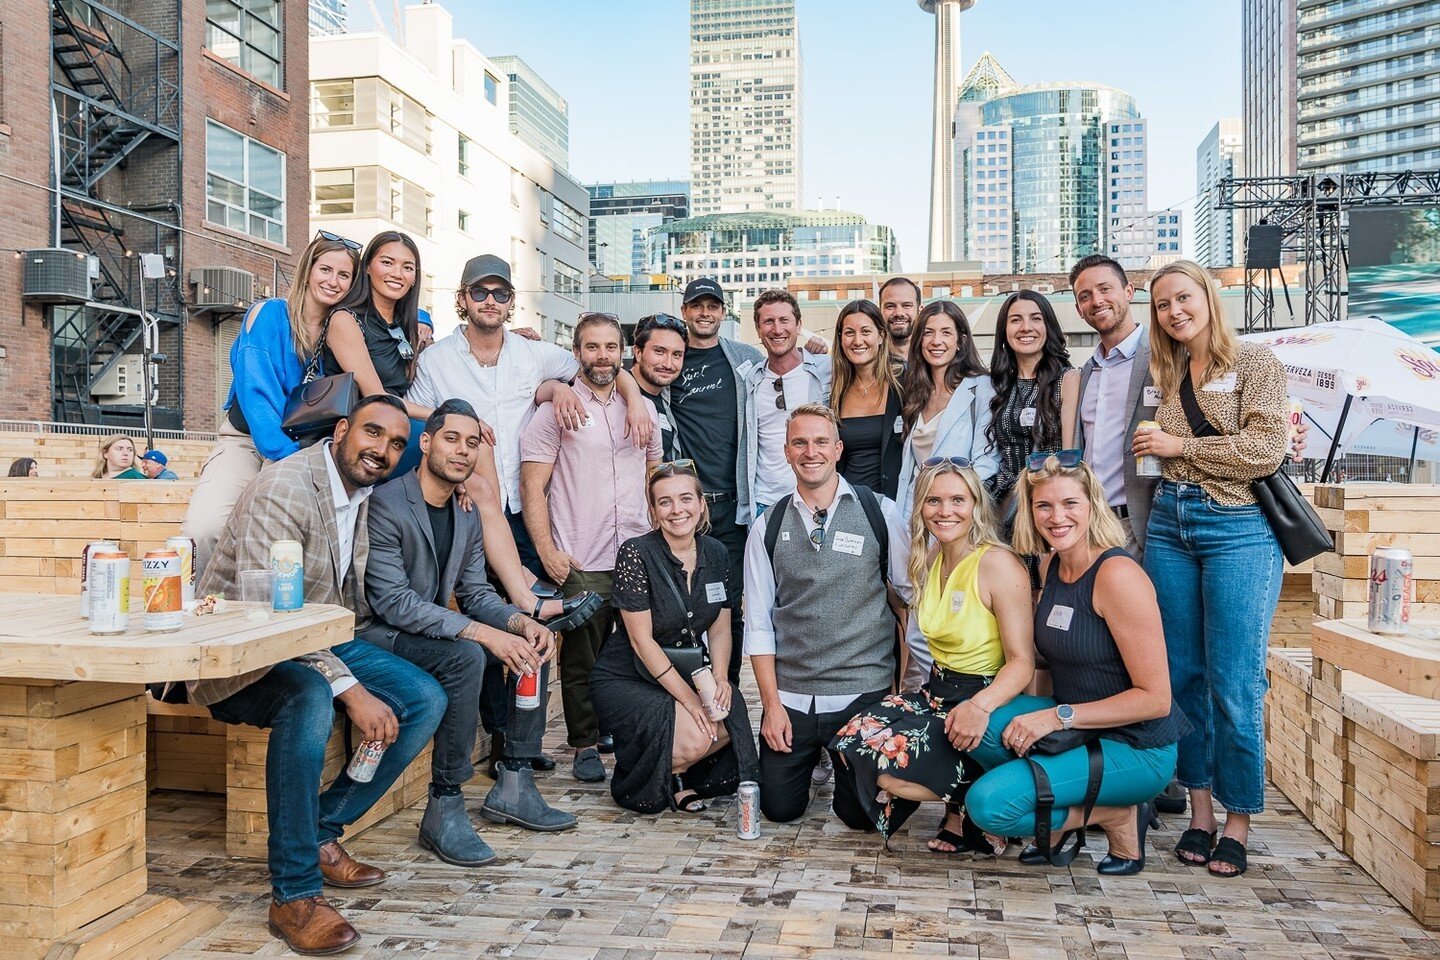 The ULI Toronto Summer Social is a must-attend event for anyone in the real estate and land use industry. It's the ideal opportunity to connect with professionals from different backgrounds and learn about new developments in the field. Attendees can